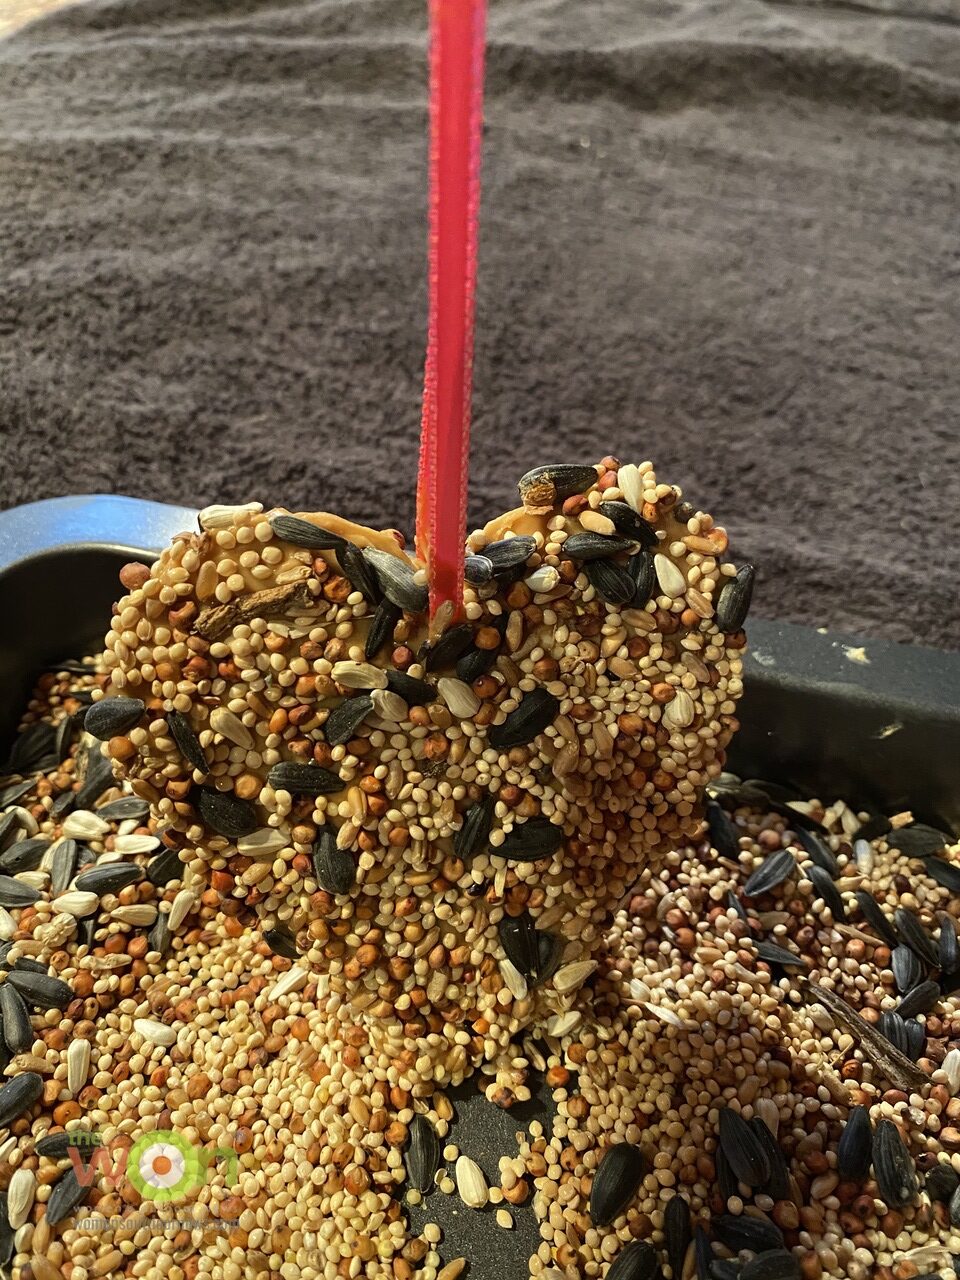 dipping the peanut butter heart into birdseed for Heart-Shaped Bird Feeder